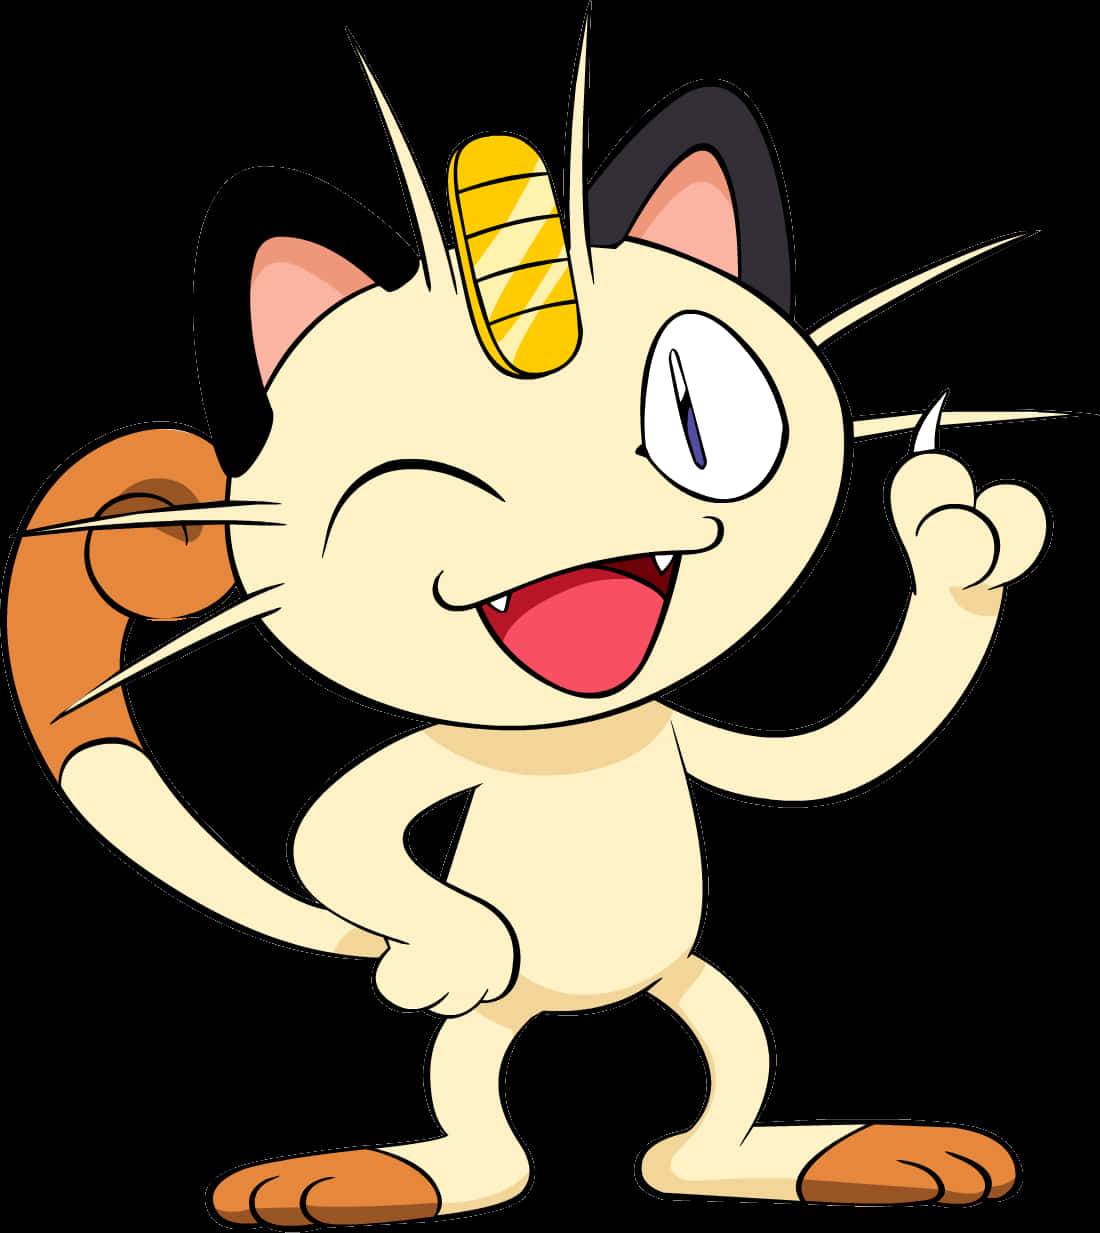 Cartoon Cat With A Horn On Its Head PNG